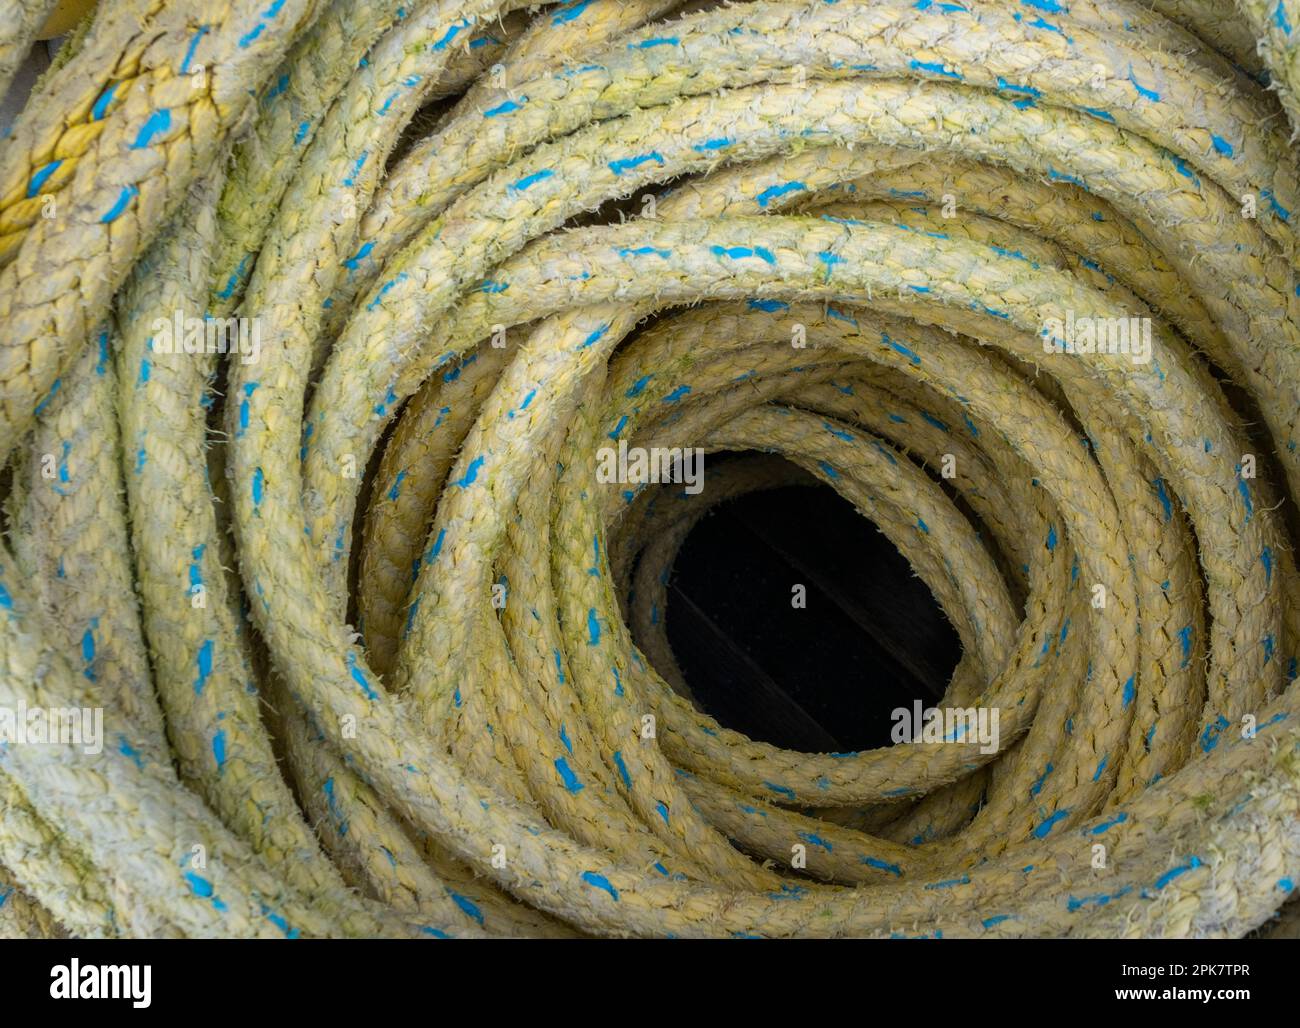 A heap of coiled industrial rope. Stock Photo